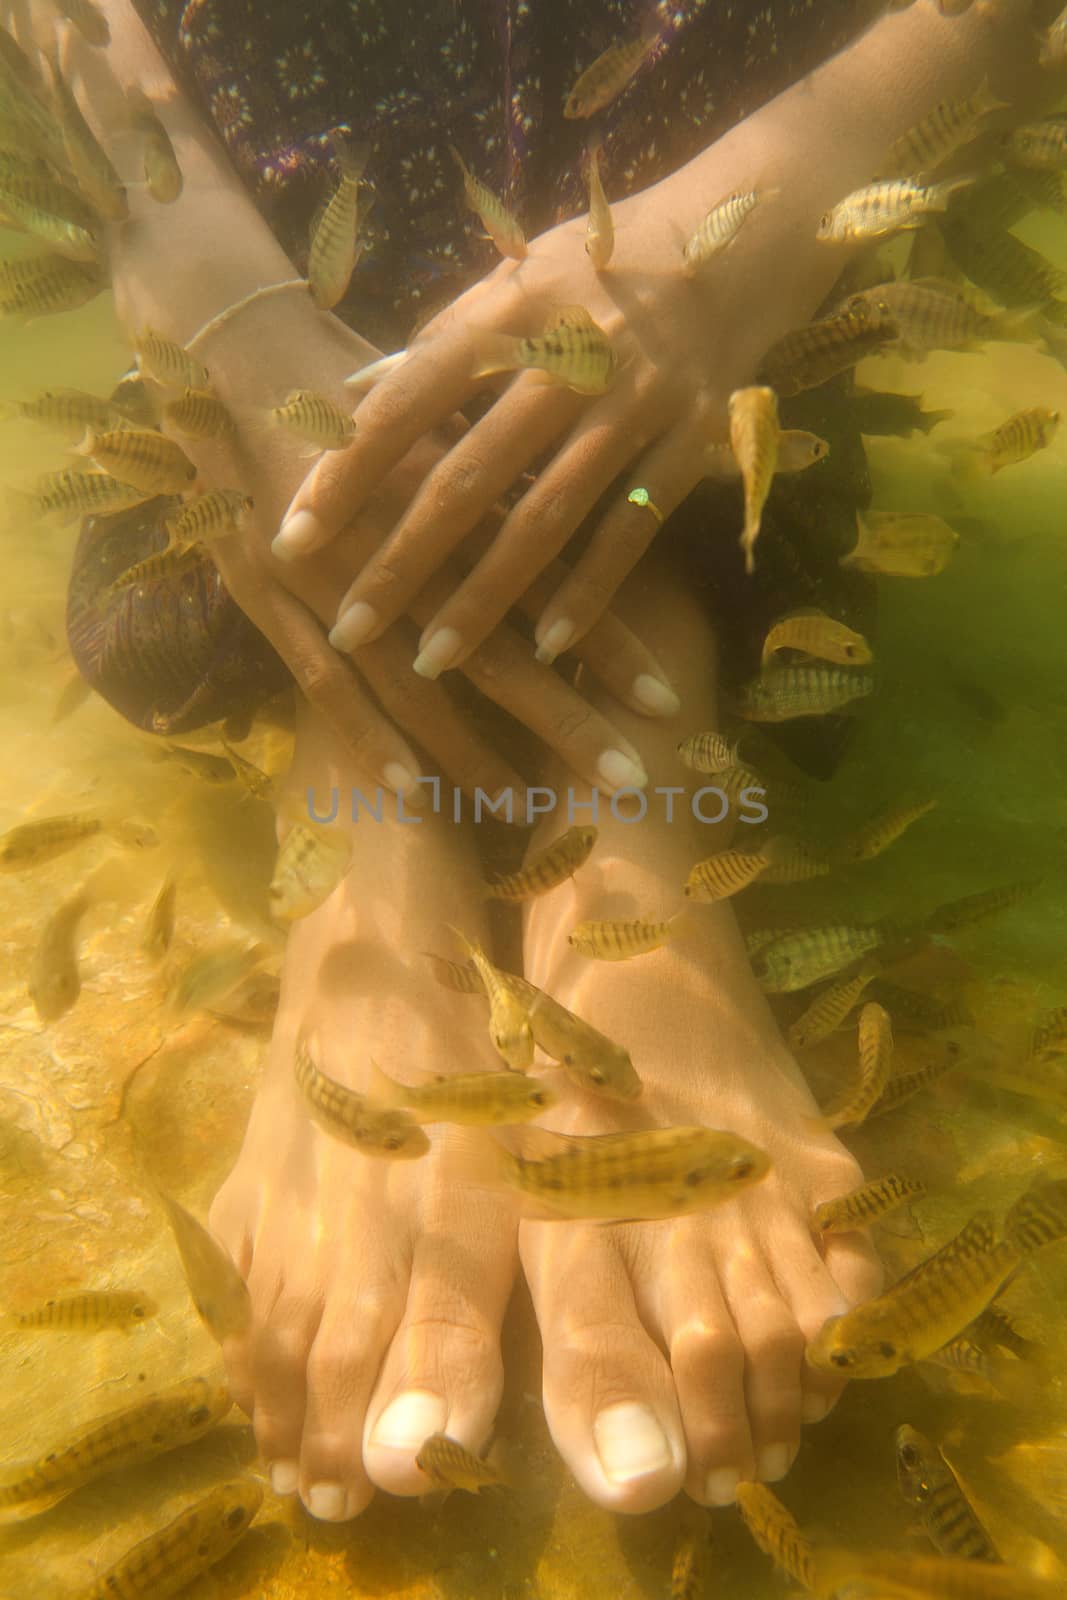 Fish spa feet pedicure skin care treatment by think4photop